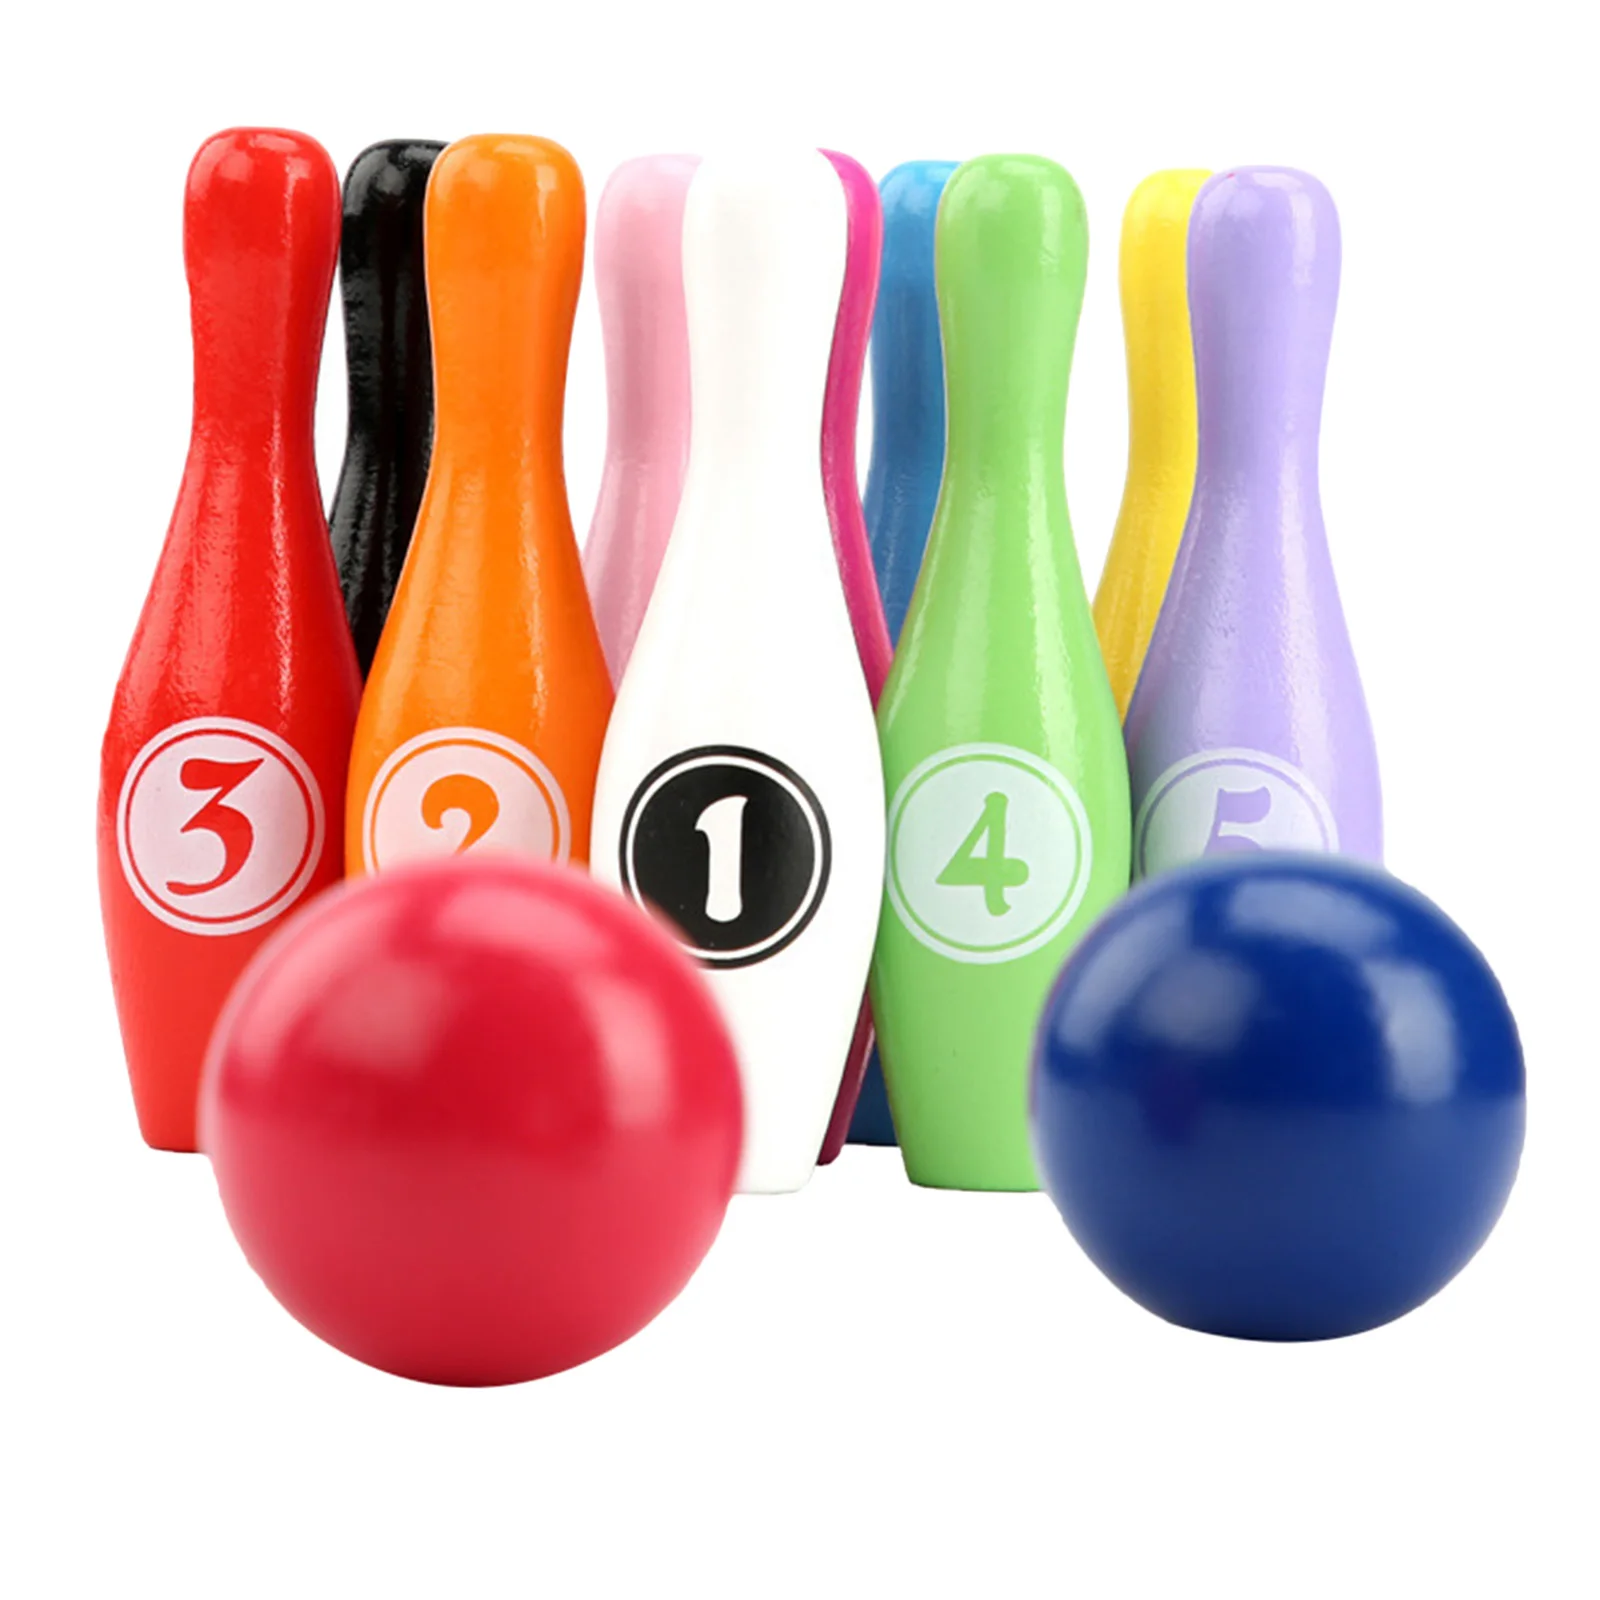 Wooden Bowling Set 10 Pins 2 Balls Education Develop Sports Motor Skill Game Toys for Boys Girls 3 4 5 Years Olds